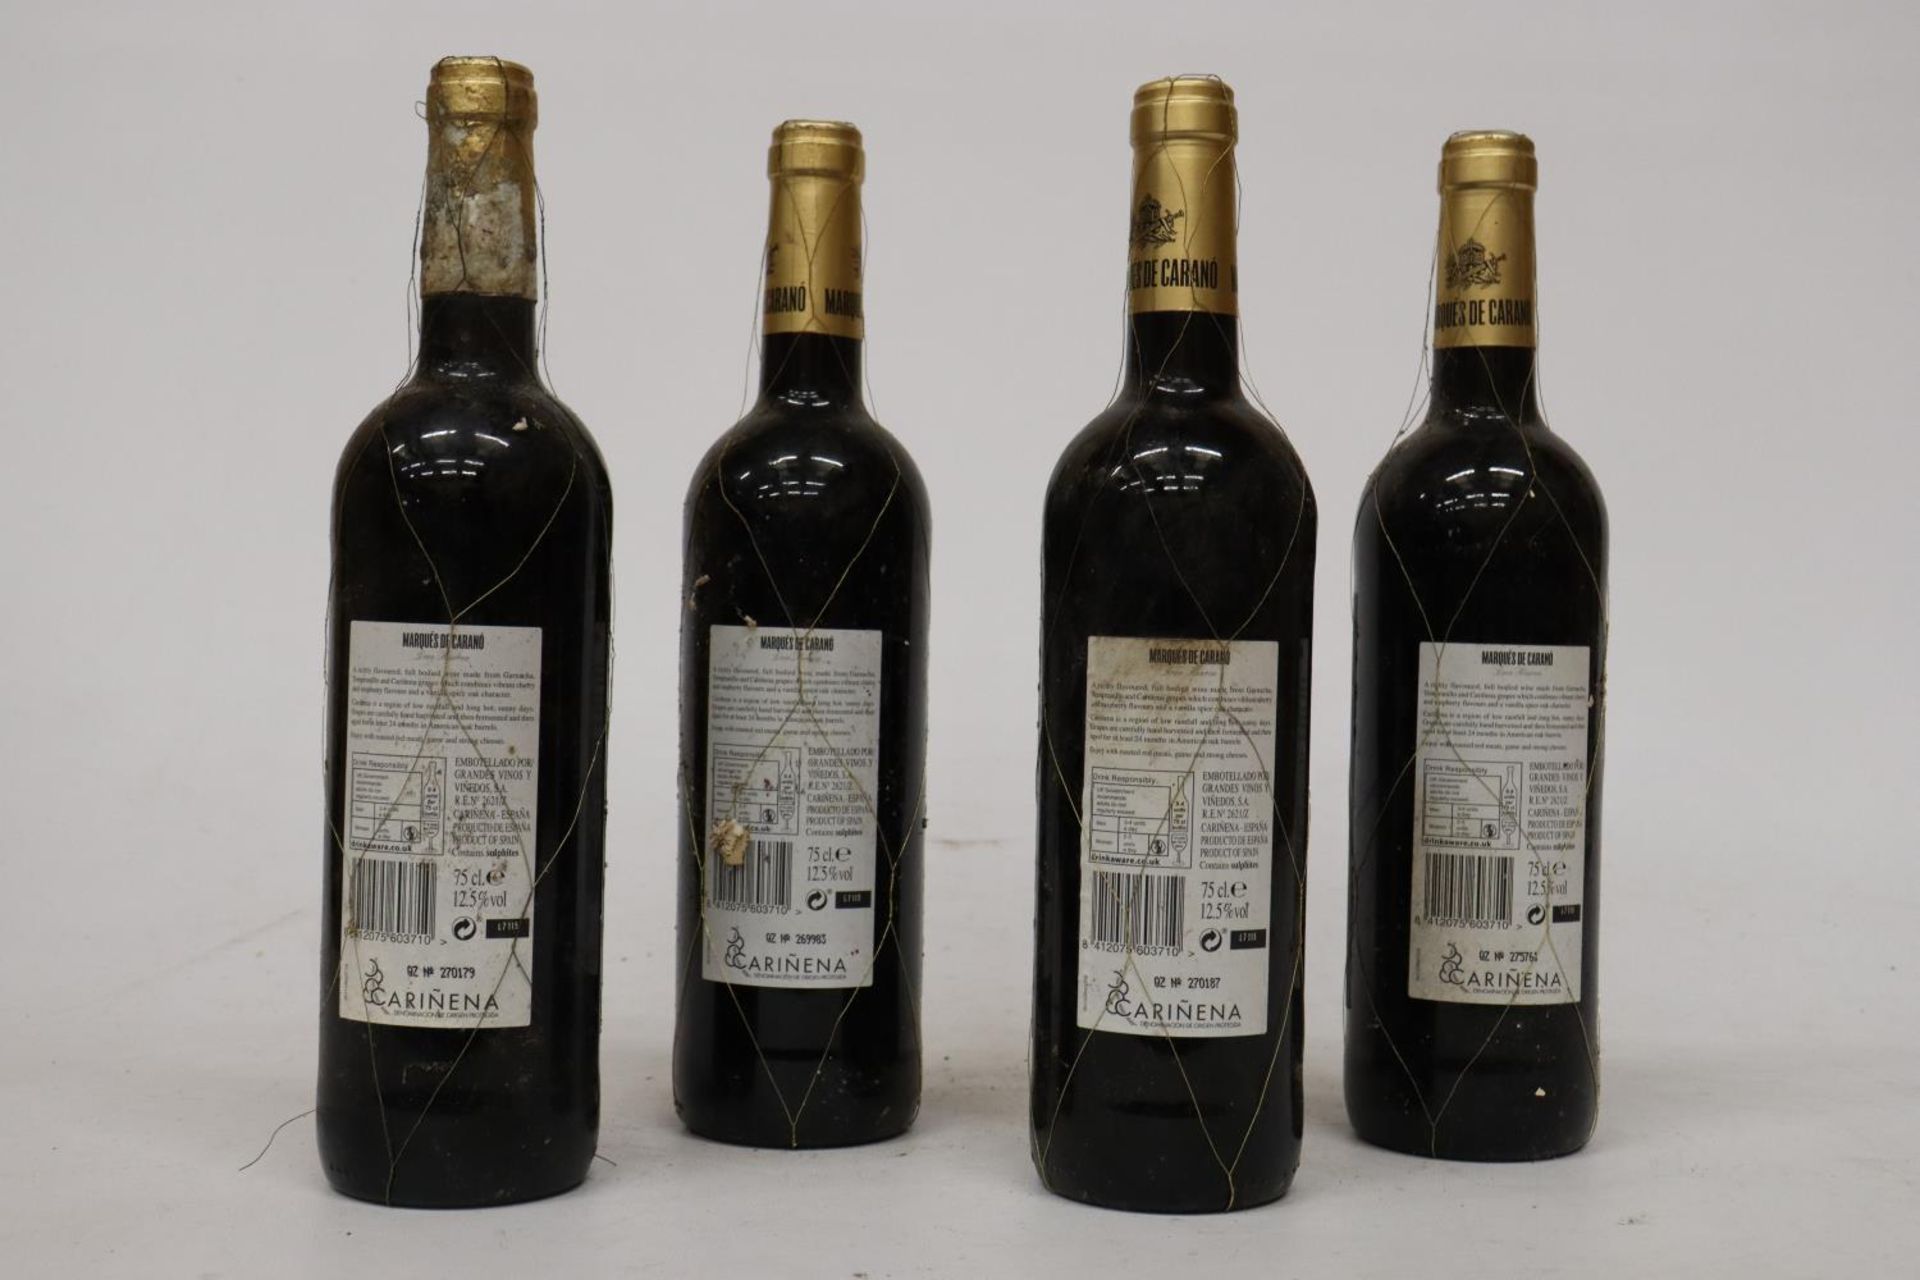 FOUR BOTTLES OF MARQUES DE CARANO GRAN RESERVA 2011 SPANISH RED WINE - Image 3 of 4